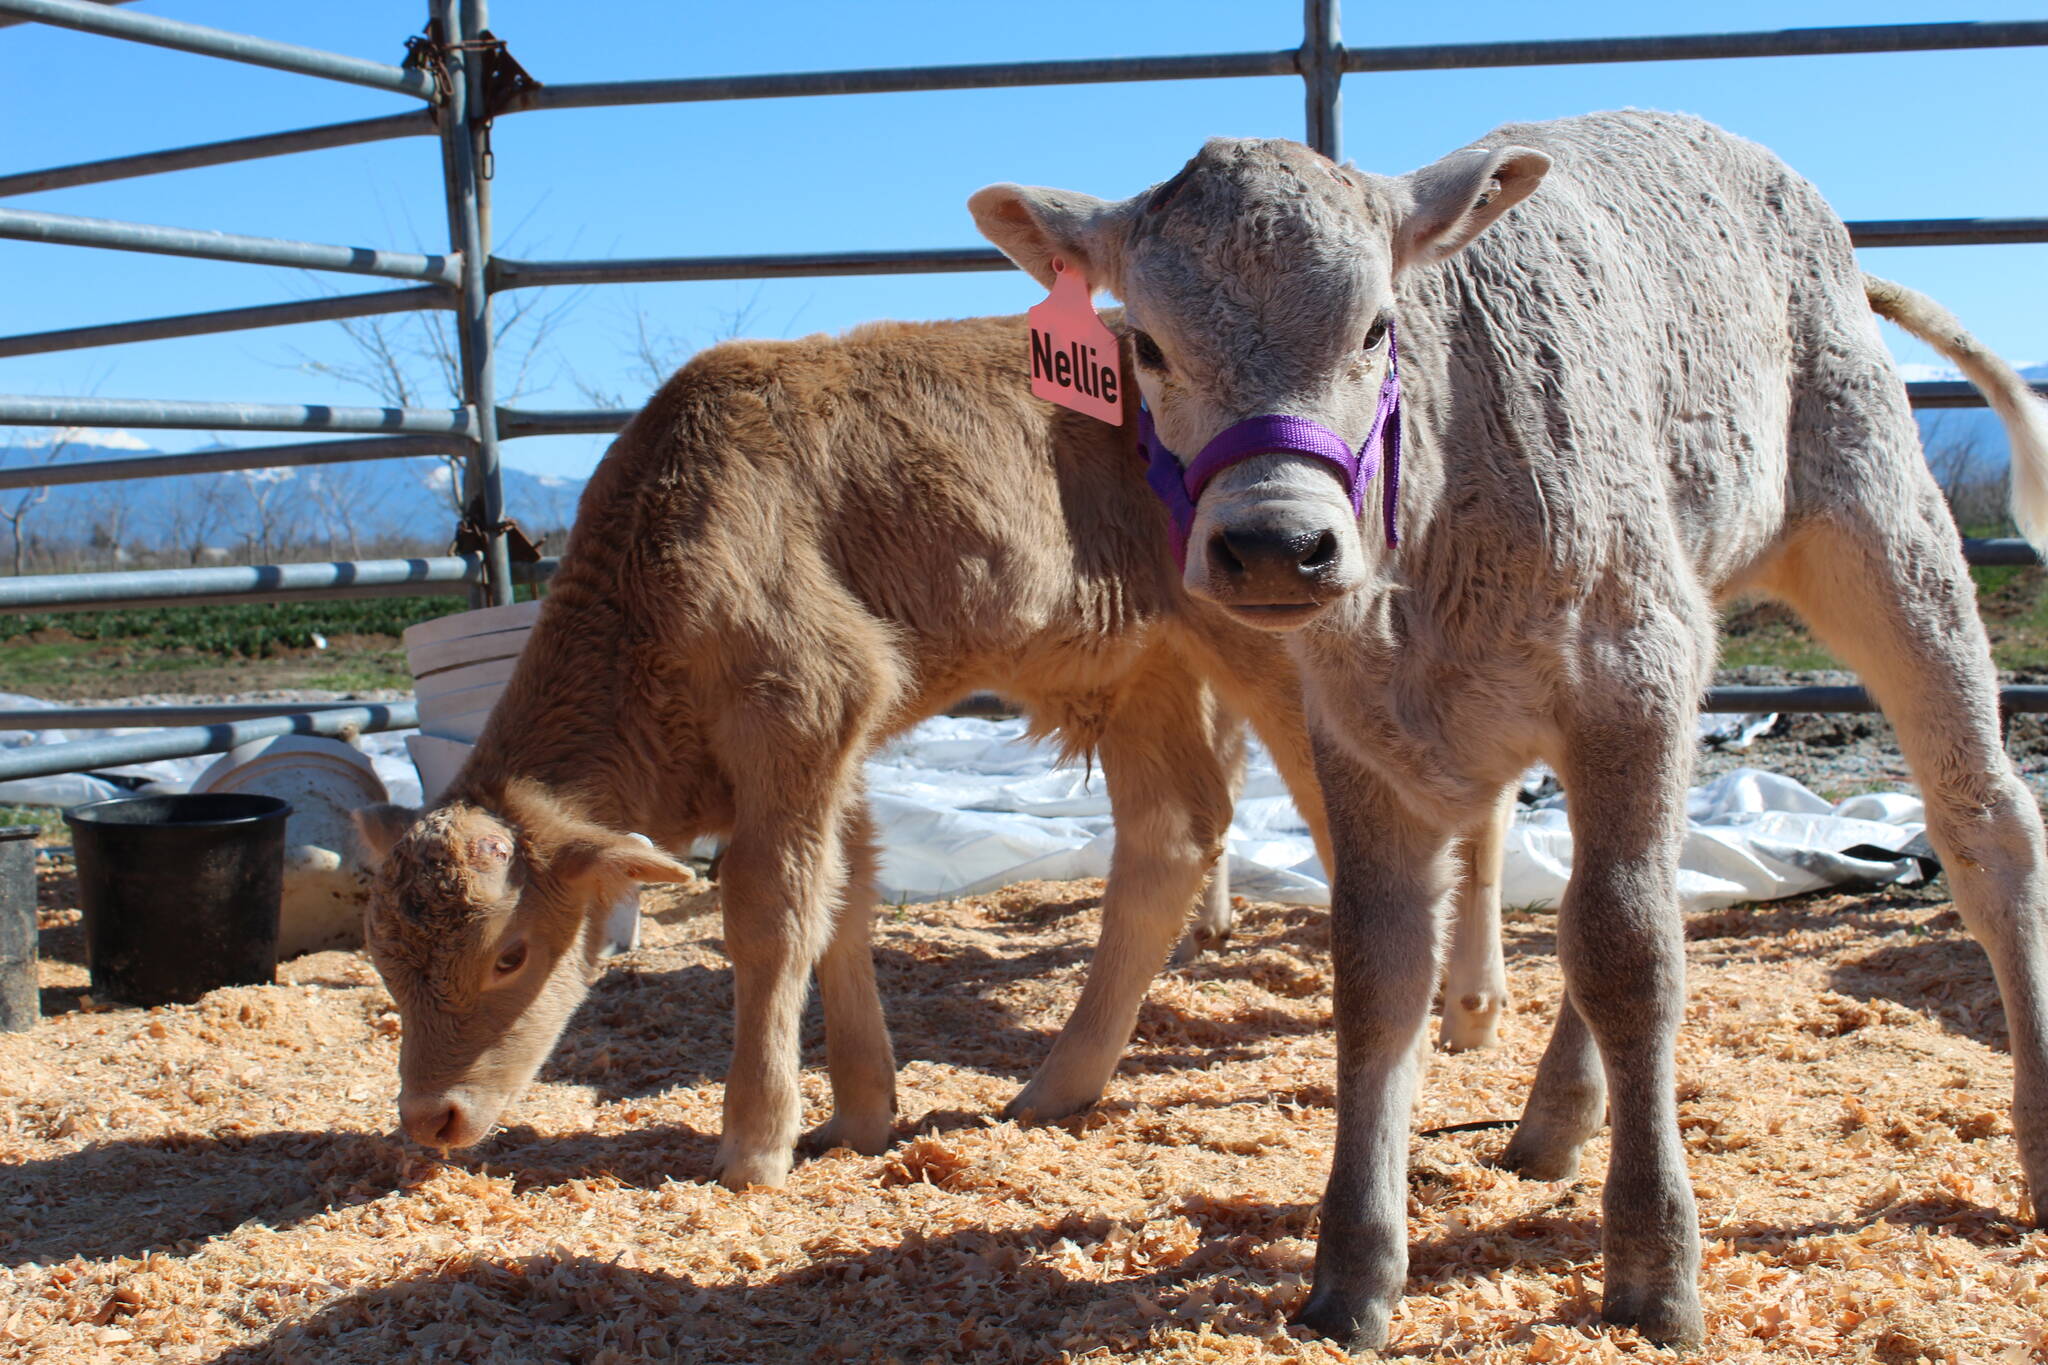 Skagit Valley Tulip Festival patrons will get the chance to cuddle and bottle feed six calves from Whidbey Island Farm and Market, who will be staying at Tulip Valley Farms for the duration of the month-long event. (Photo by Karina Andrew/Whidbey News-Times)